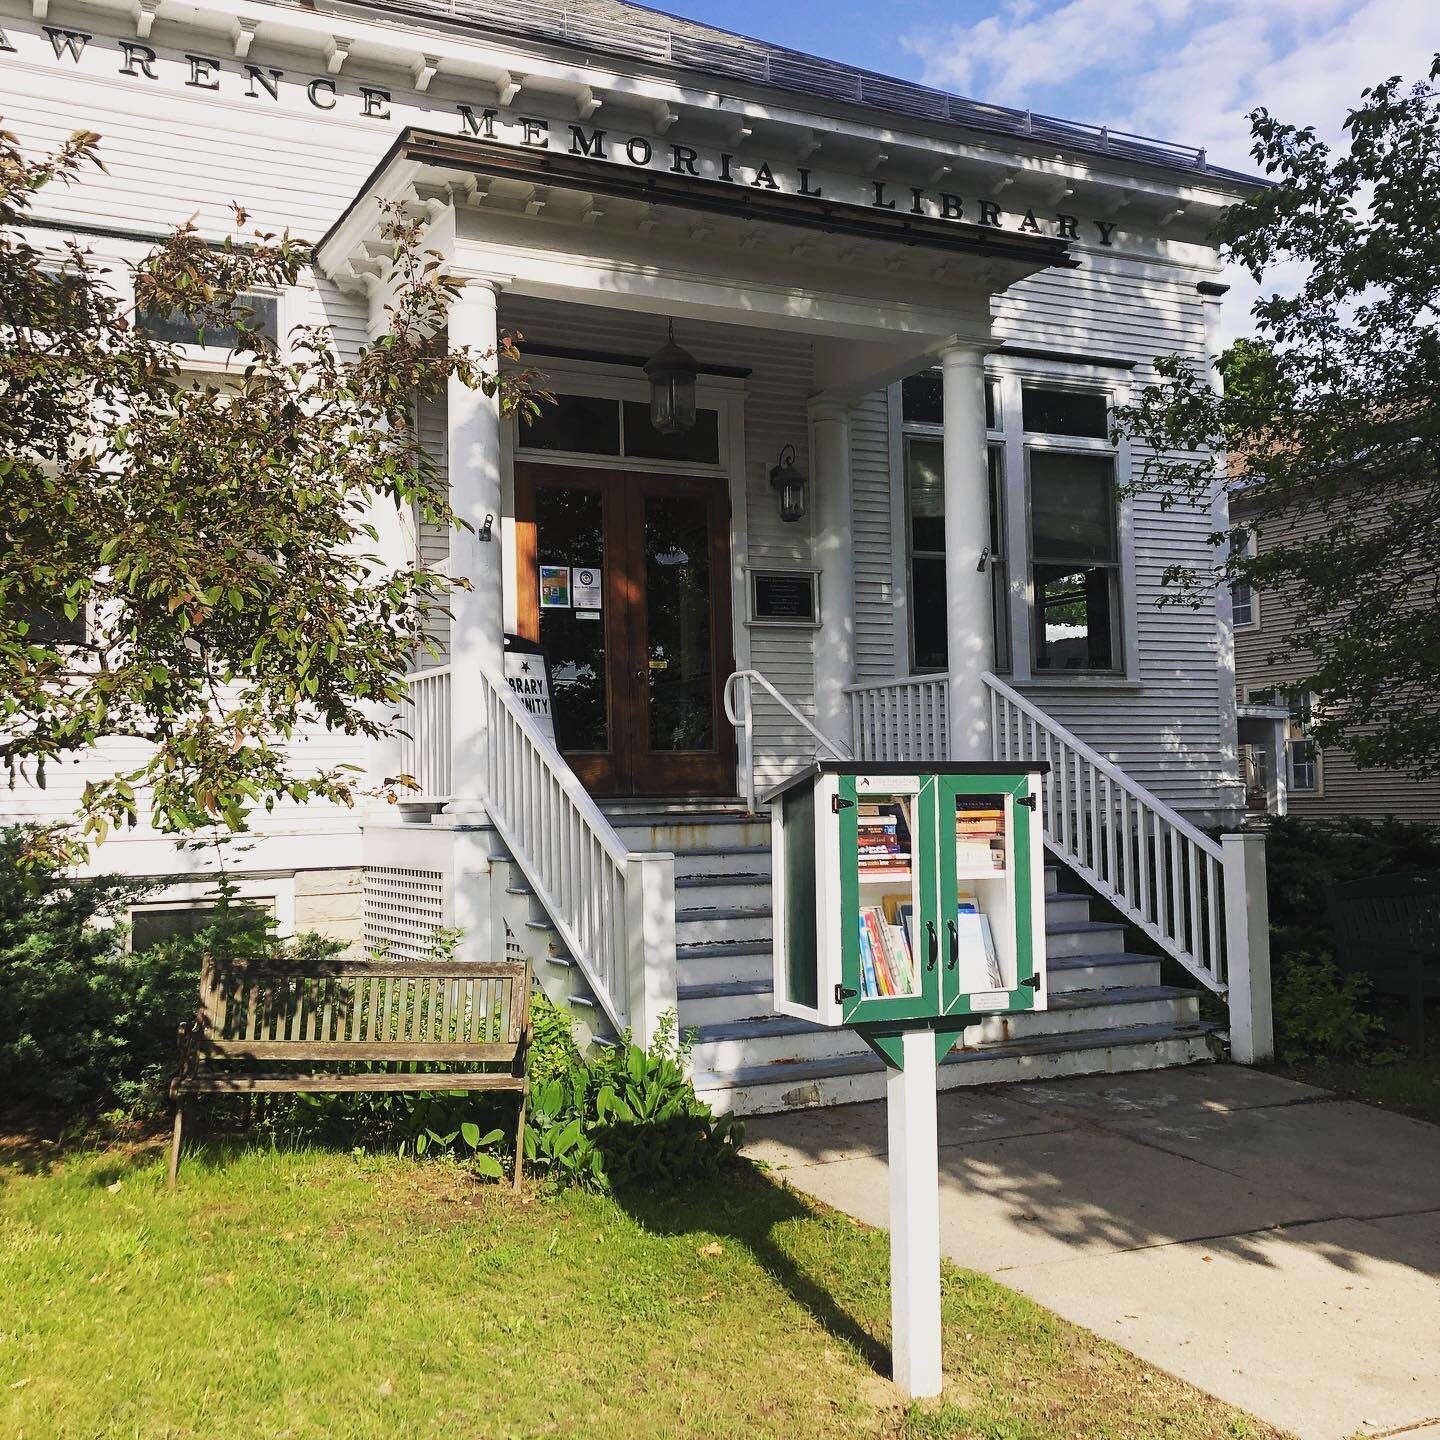 Did you know that LML has a NEW little free library right out front of the library!?! 

Take a book, leave a book! Perfect for a quick book stop or for those times we&rsquo;re not open! Stop on by and check it out for yourself!